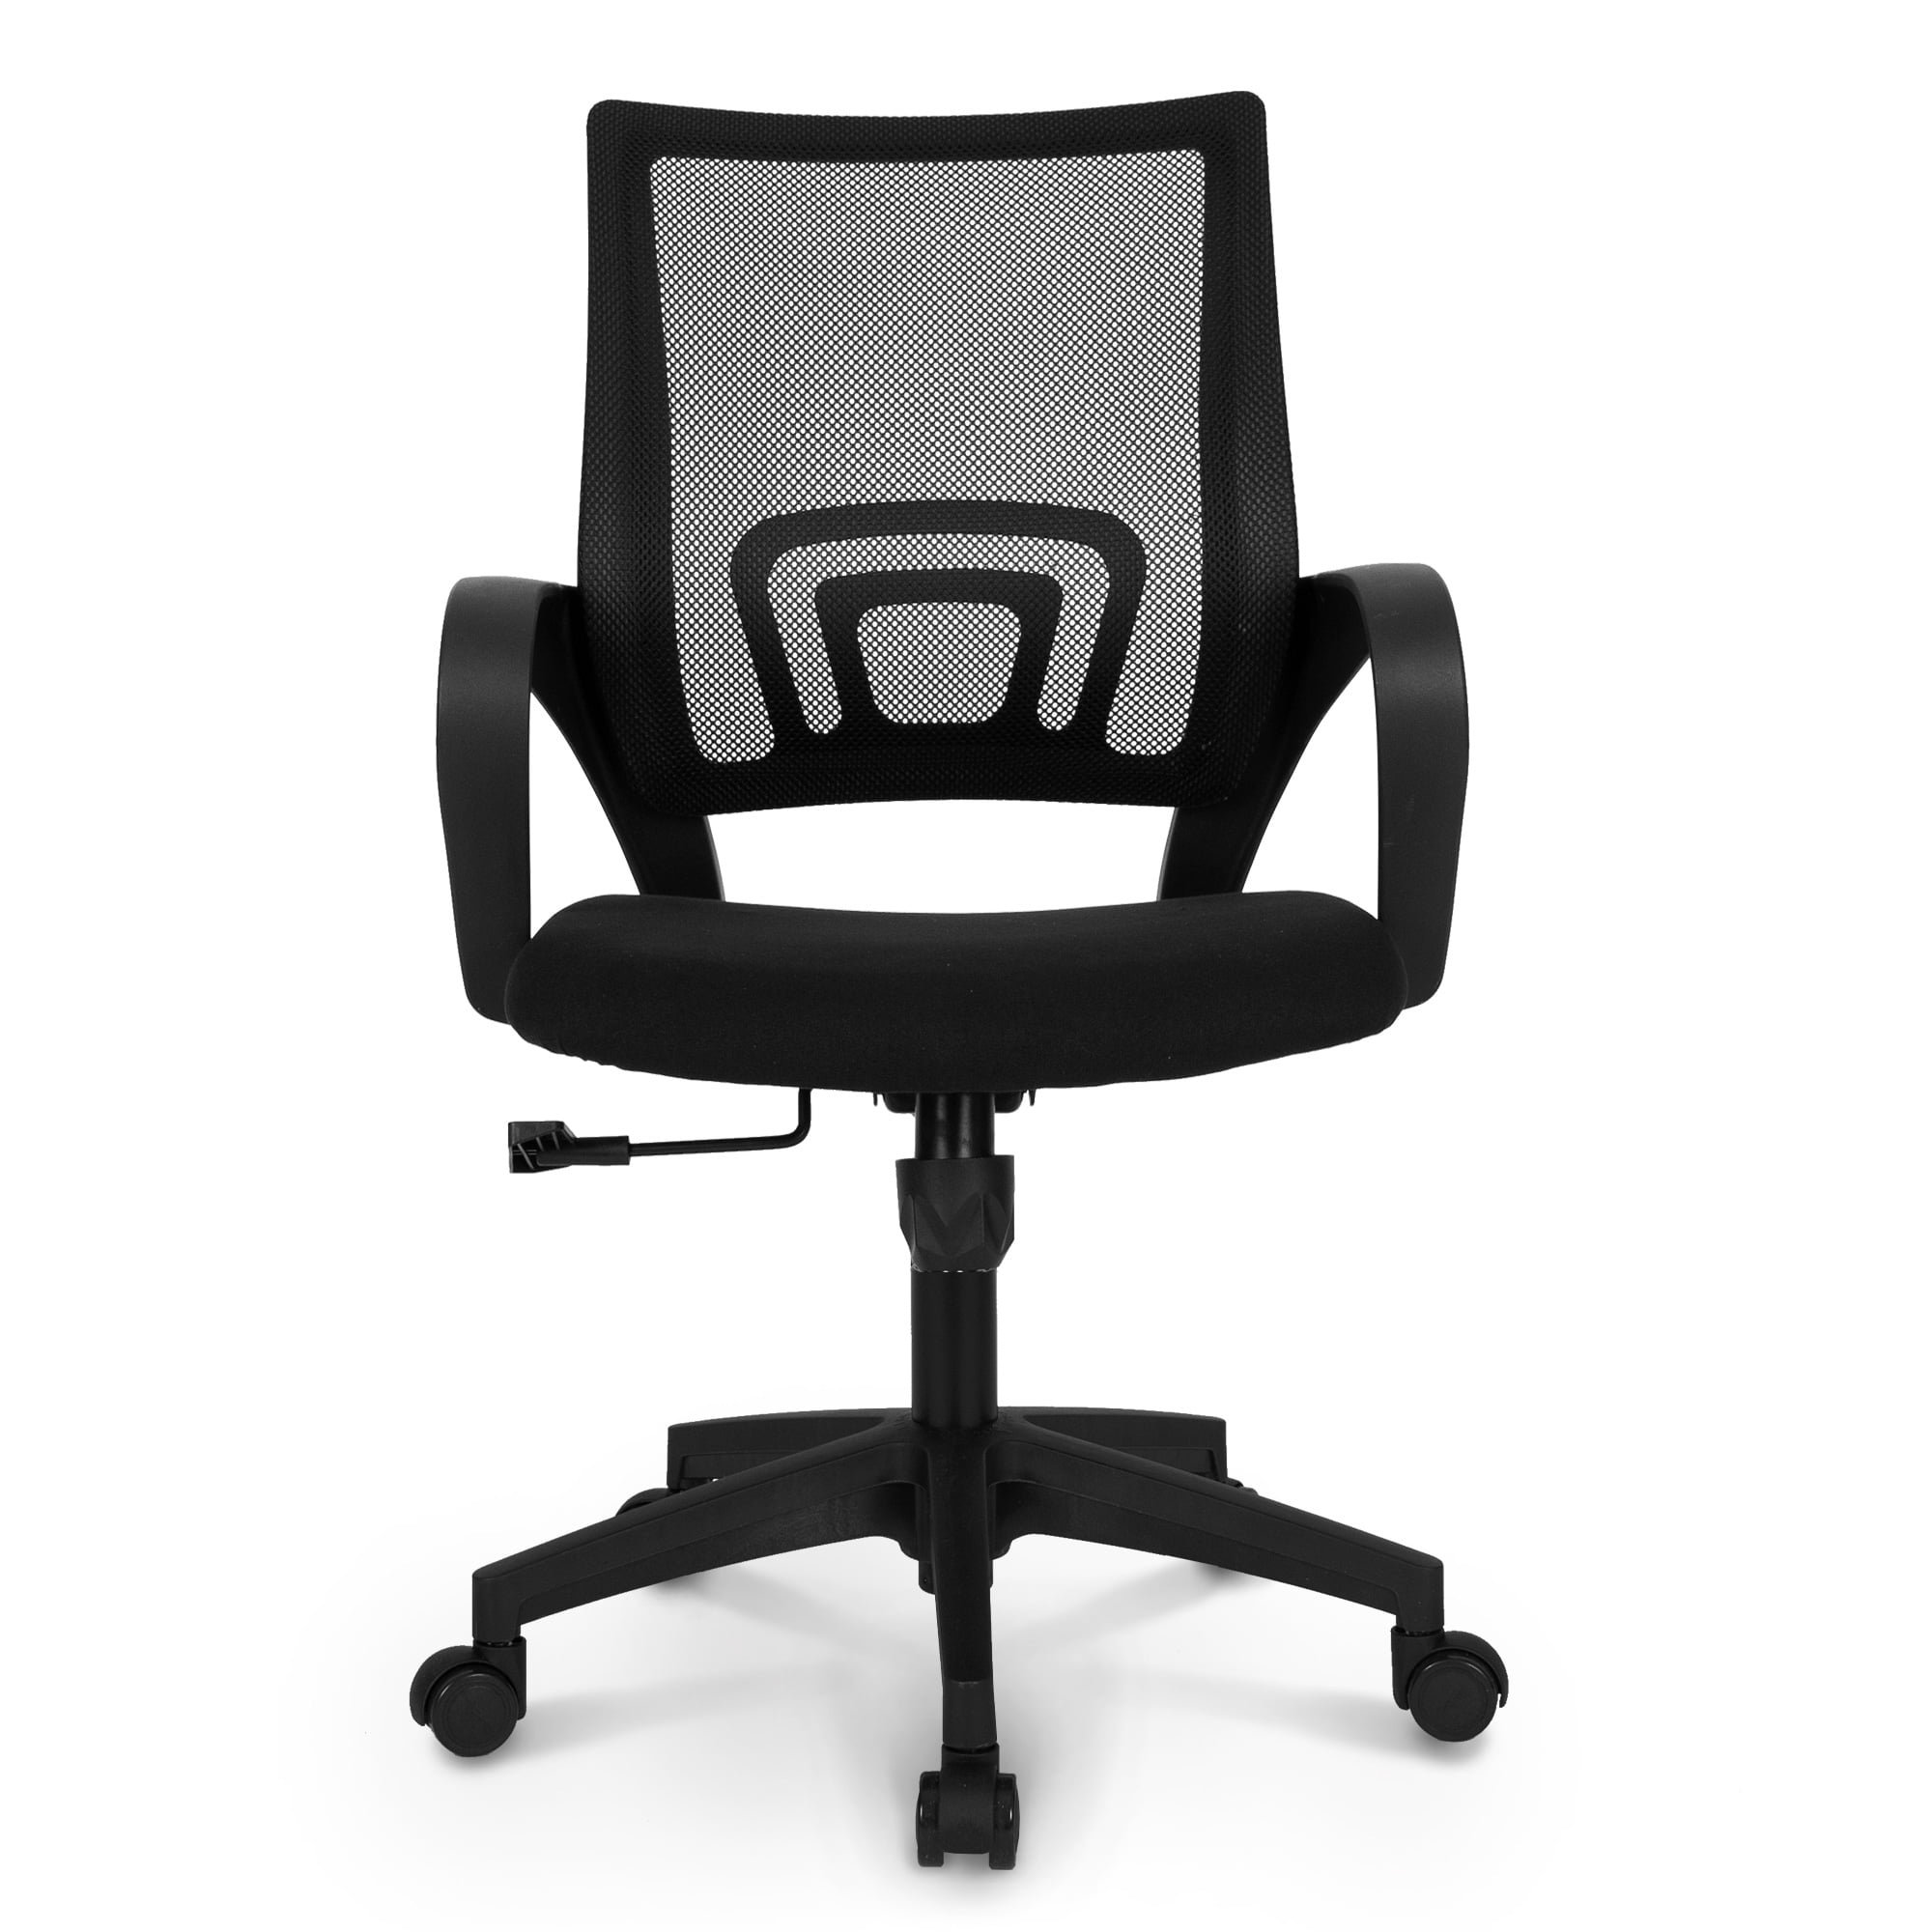 Neo Chair MB-5 Ergonomic Mid Back Adjustable Mesh Home Office Computer Desk Chair, Black